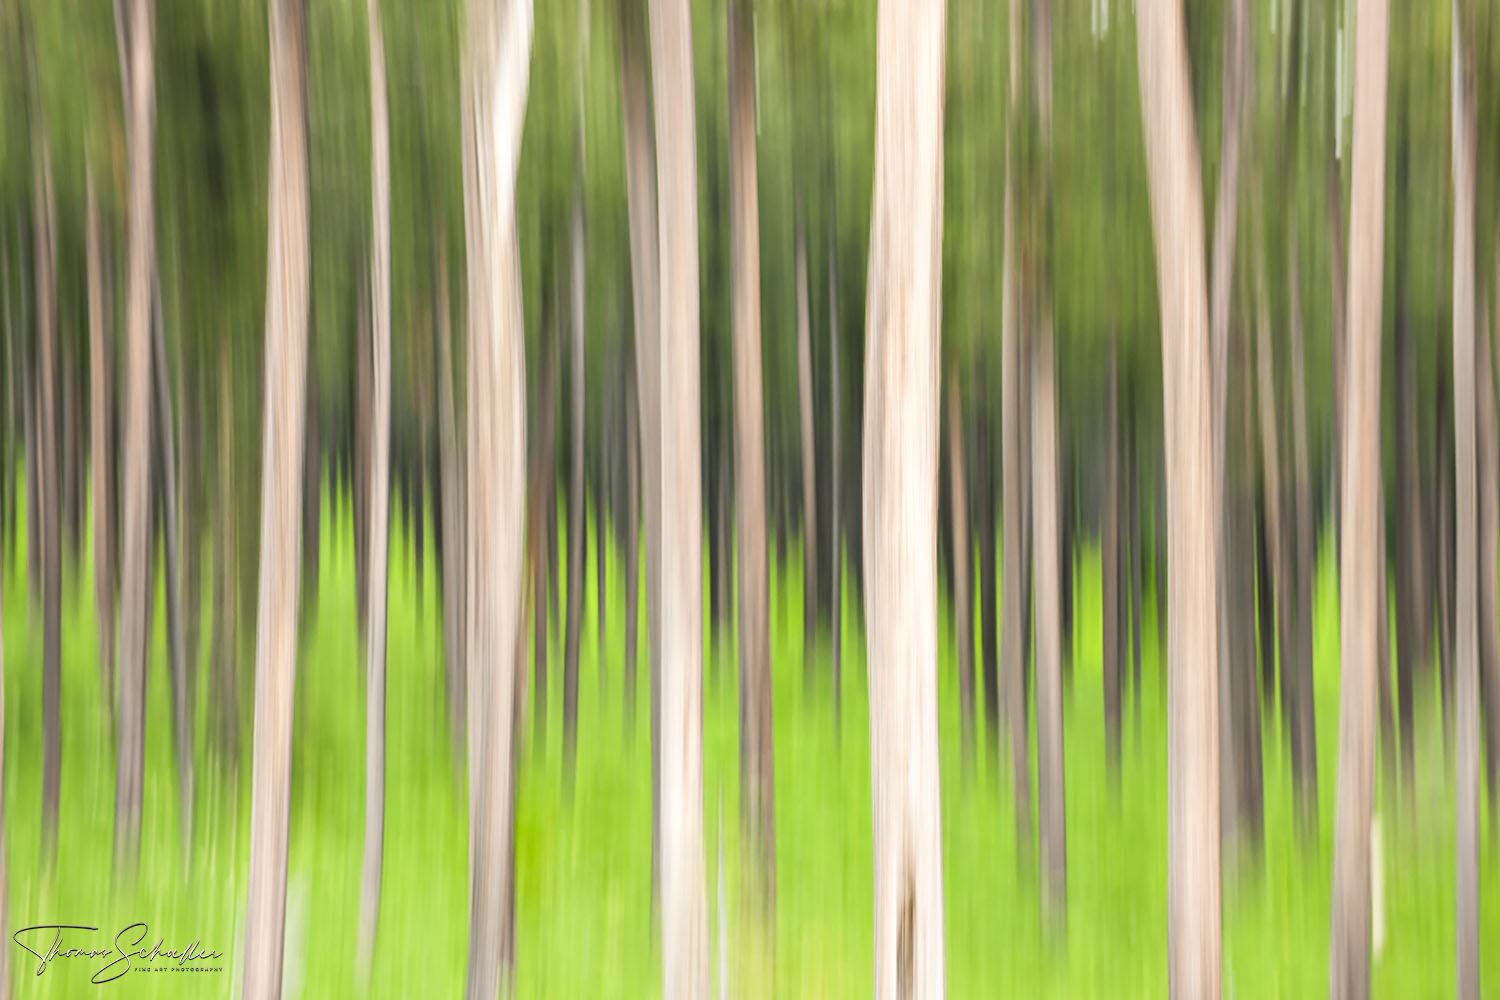 High-end contemporary Fine Art abstract photography prints | Impressionist artwork of Glacier National Parks Ponderosa Pine forest